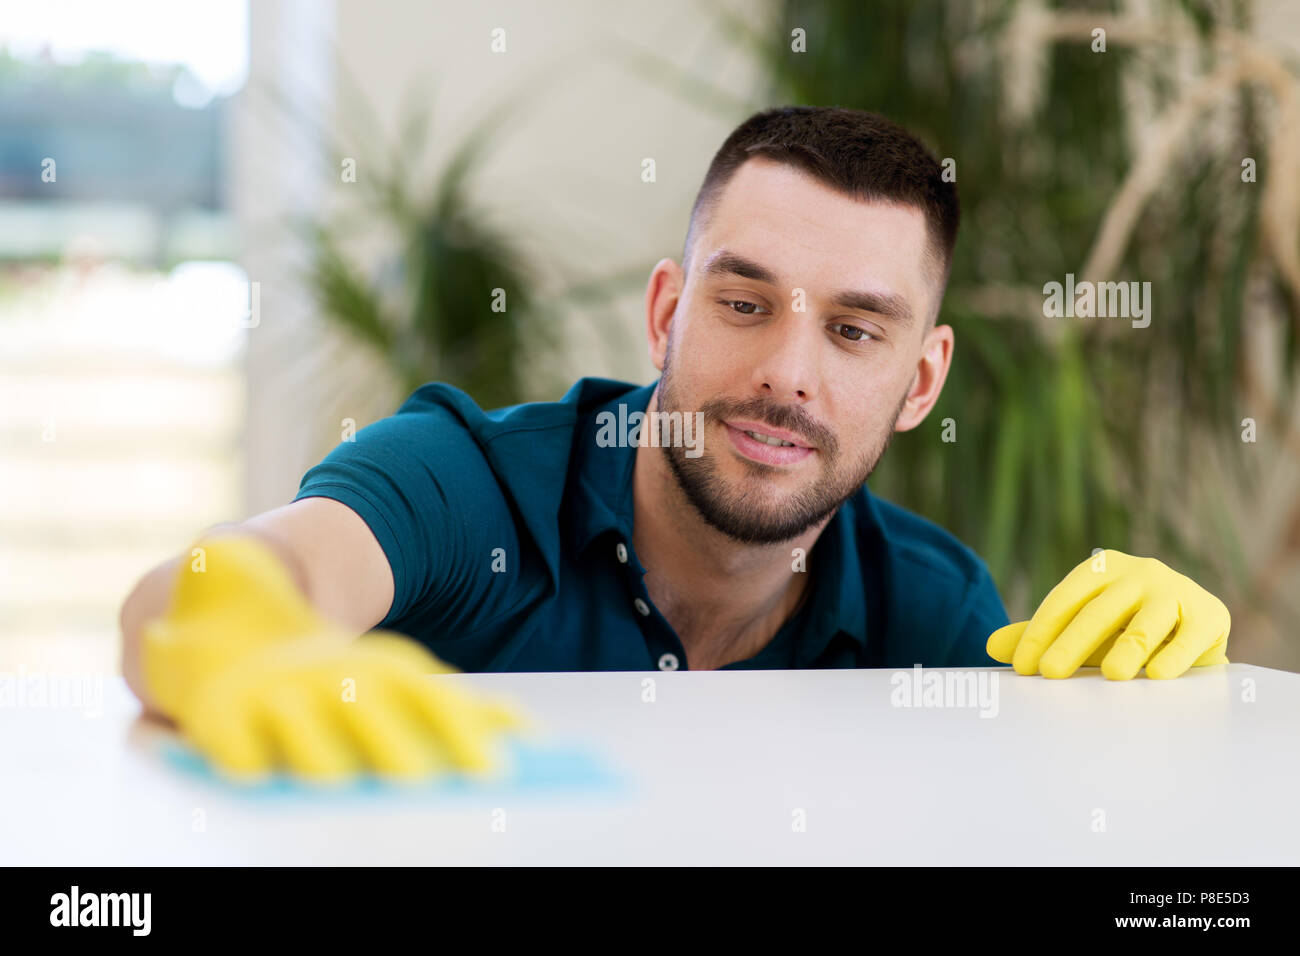 man cleaning table with cloth at home Stock Photo